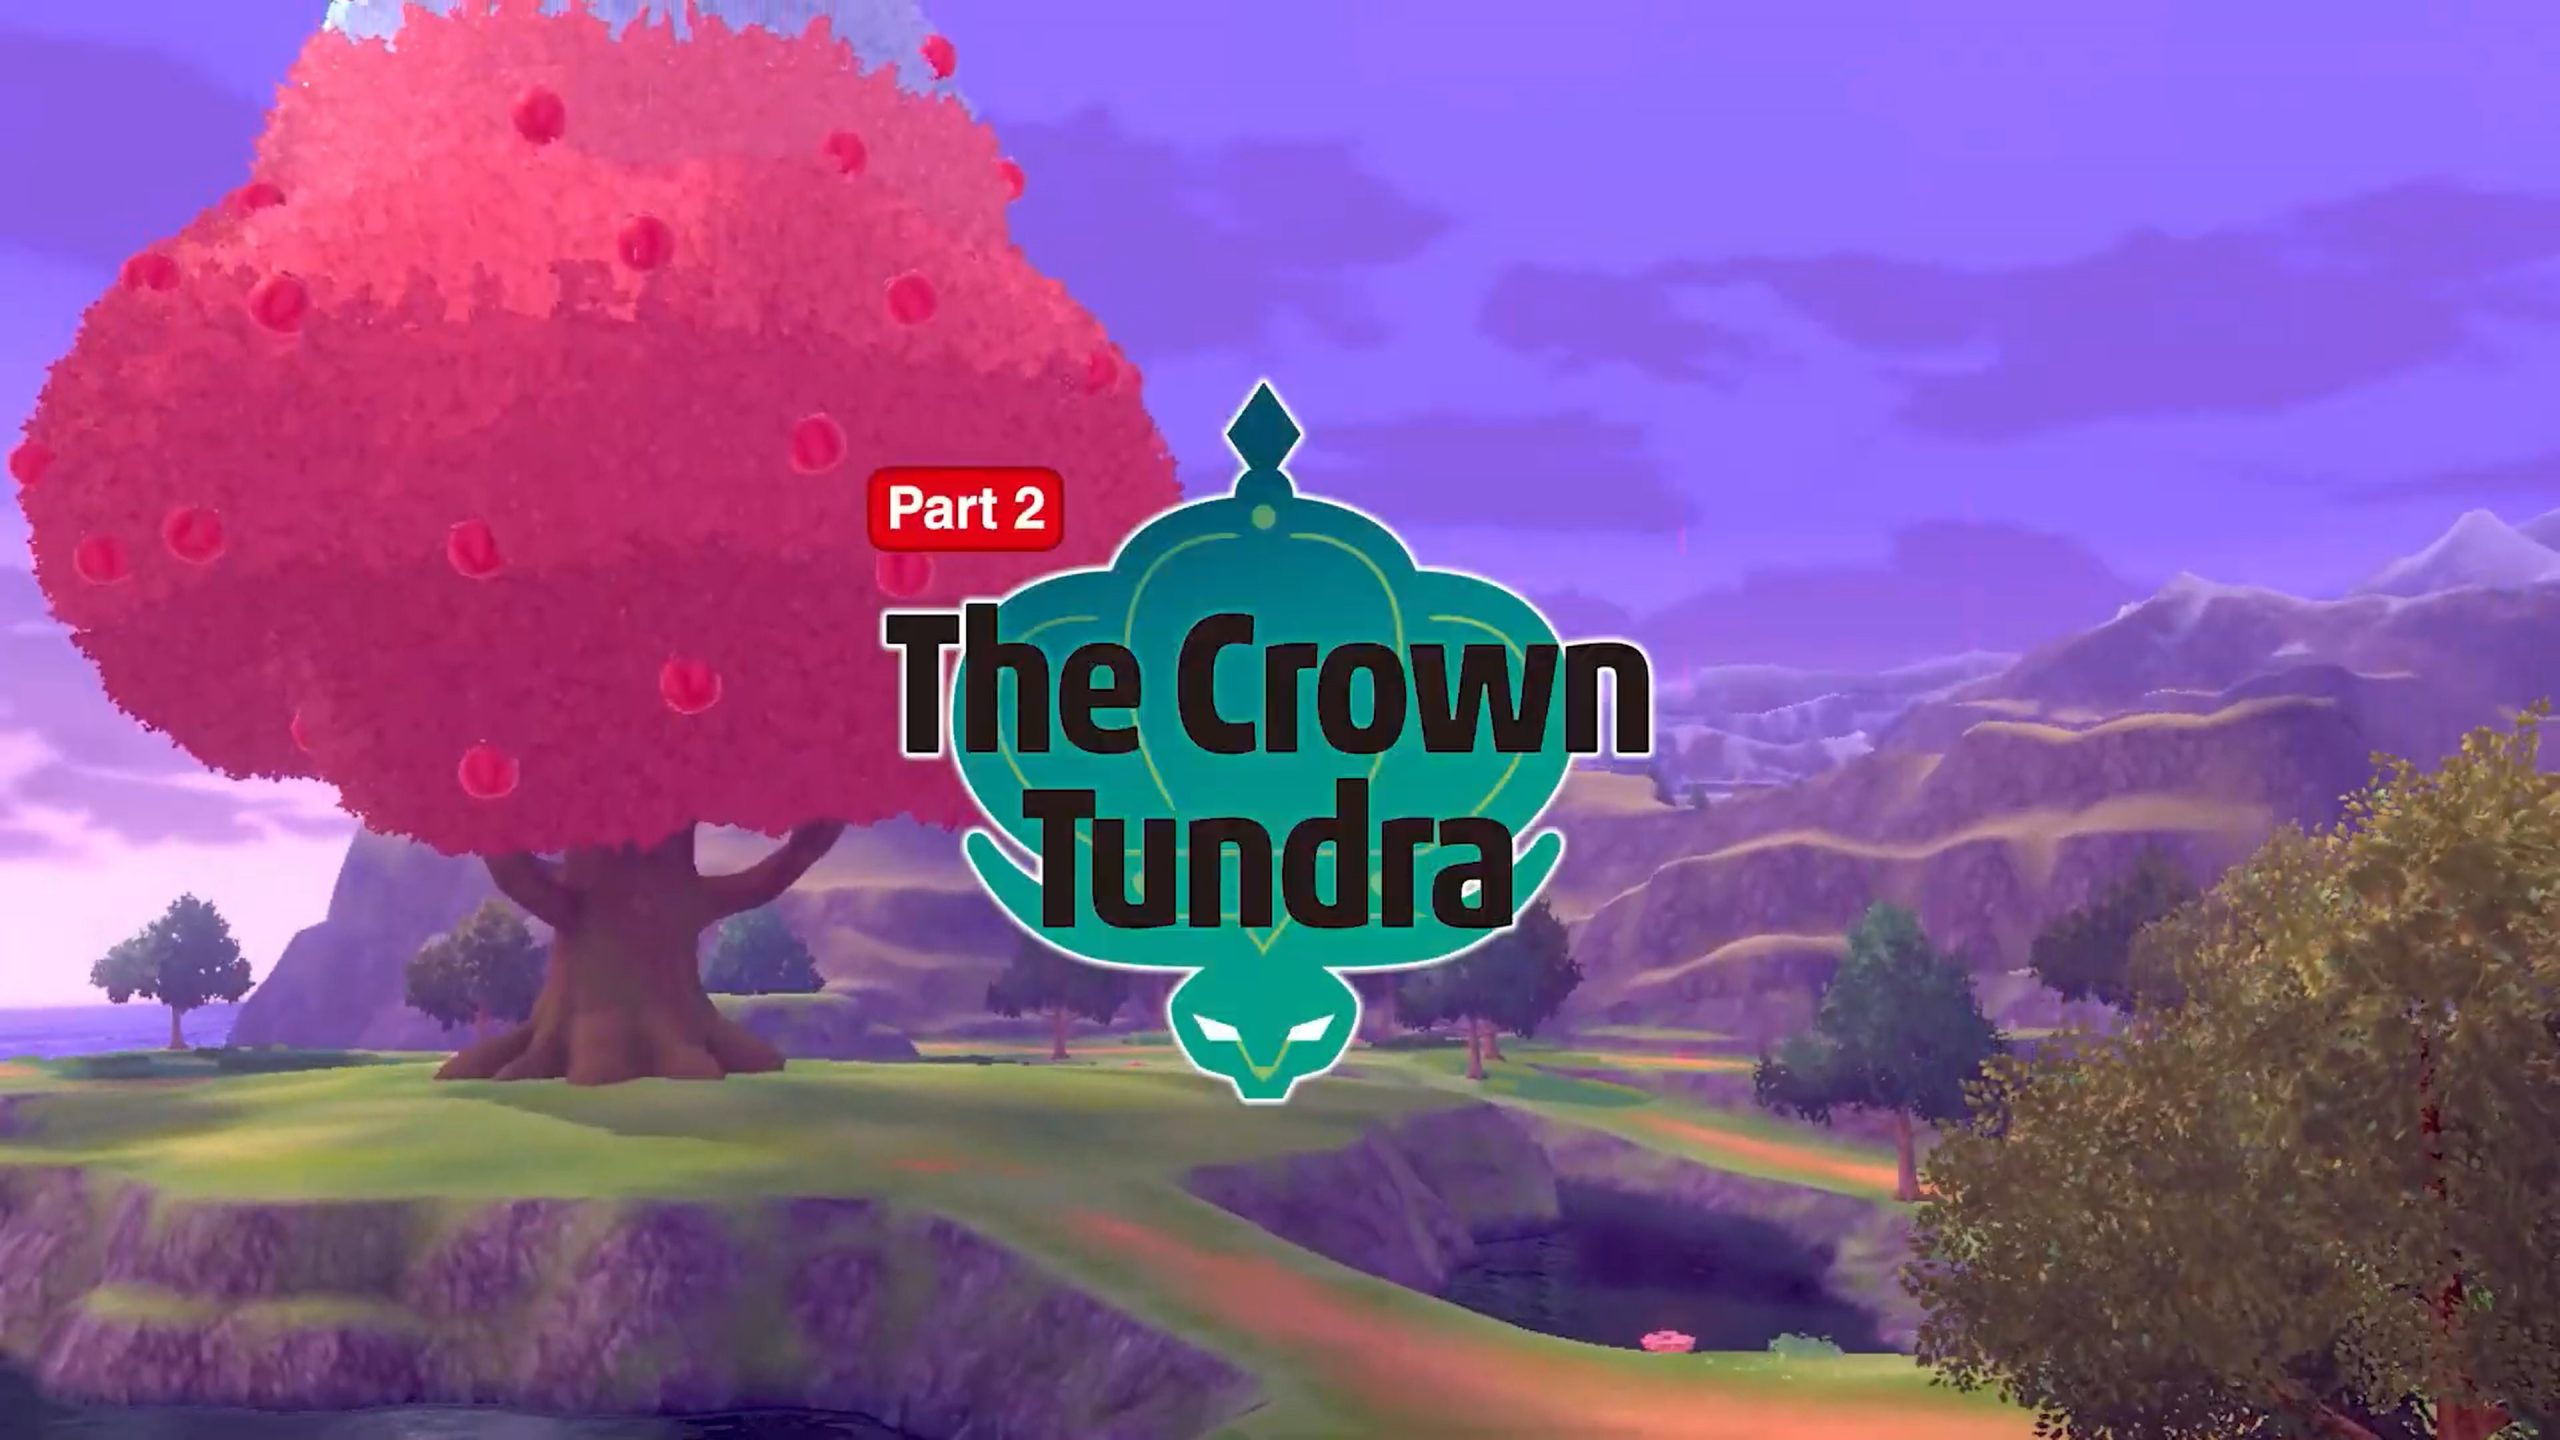 The Crown Tundra expansion for Pokémon Sword and Shield arrives on